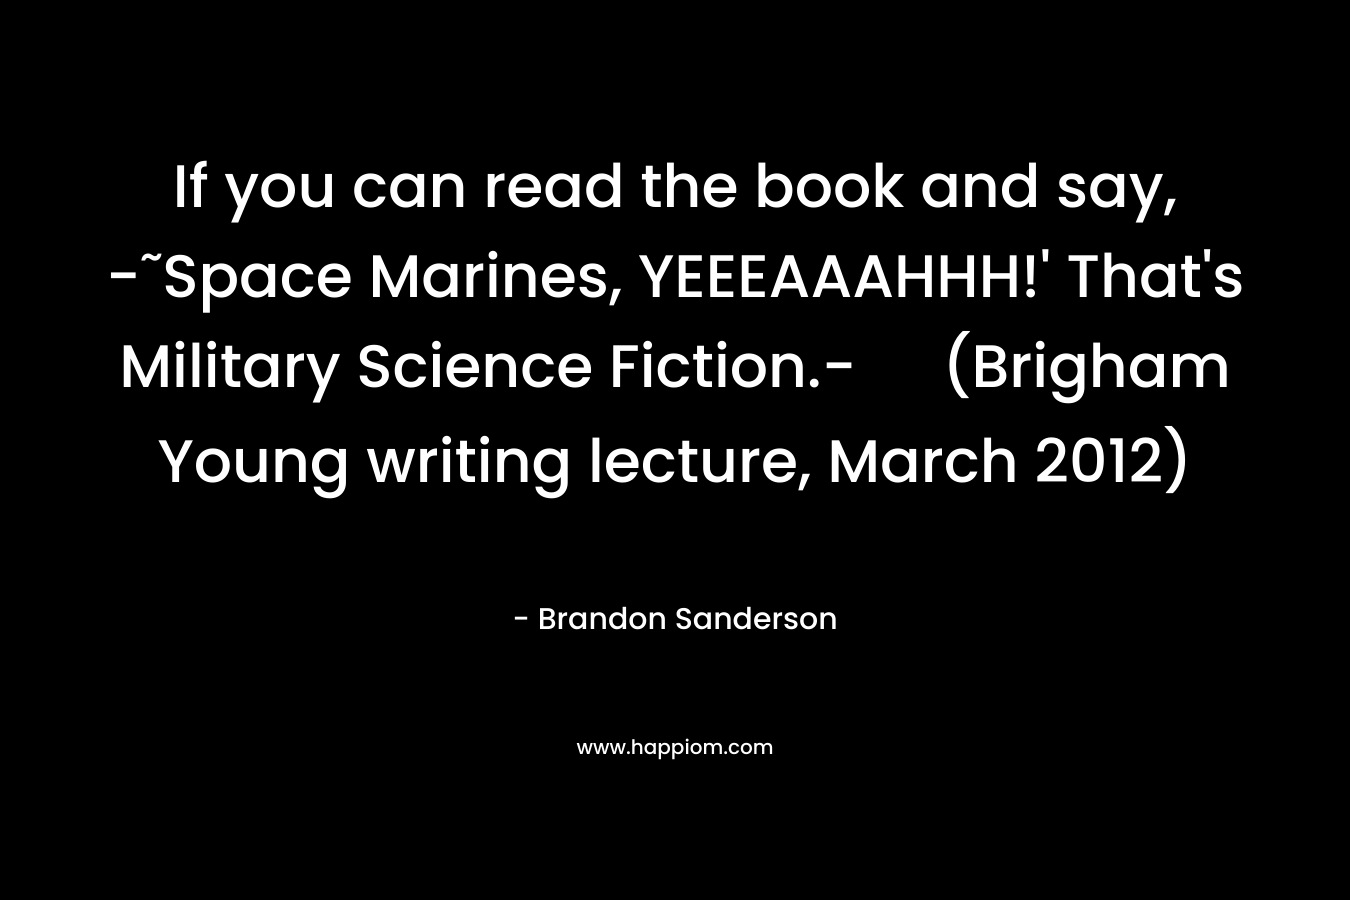 If you can read the book and say, -˜Space Marines, YEEEAAAHHH!' That's Military Science Fiction.- (Brigham Young writing lecture, March 2012)